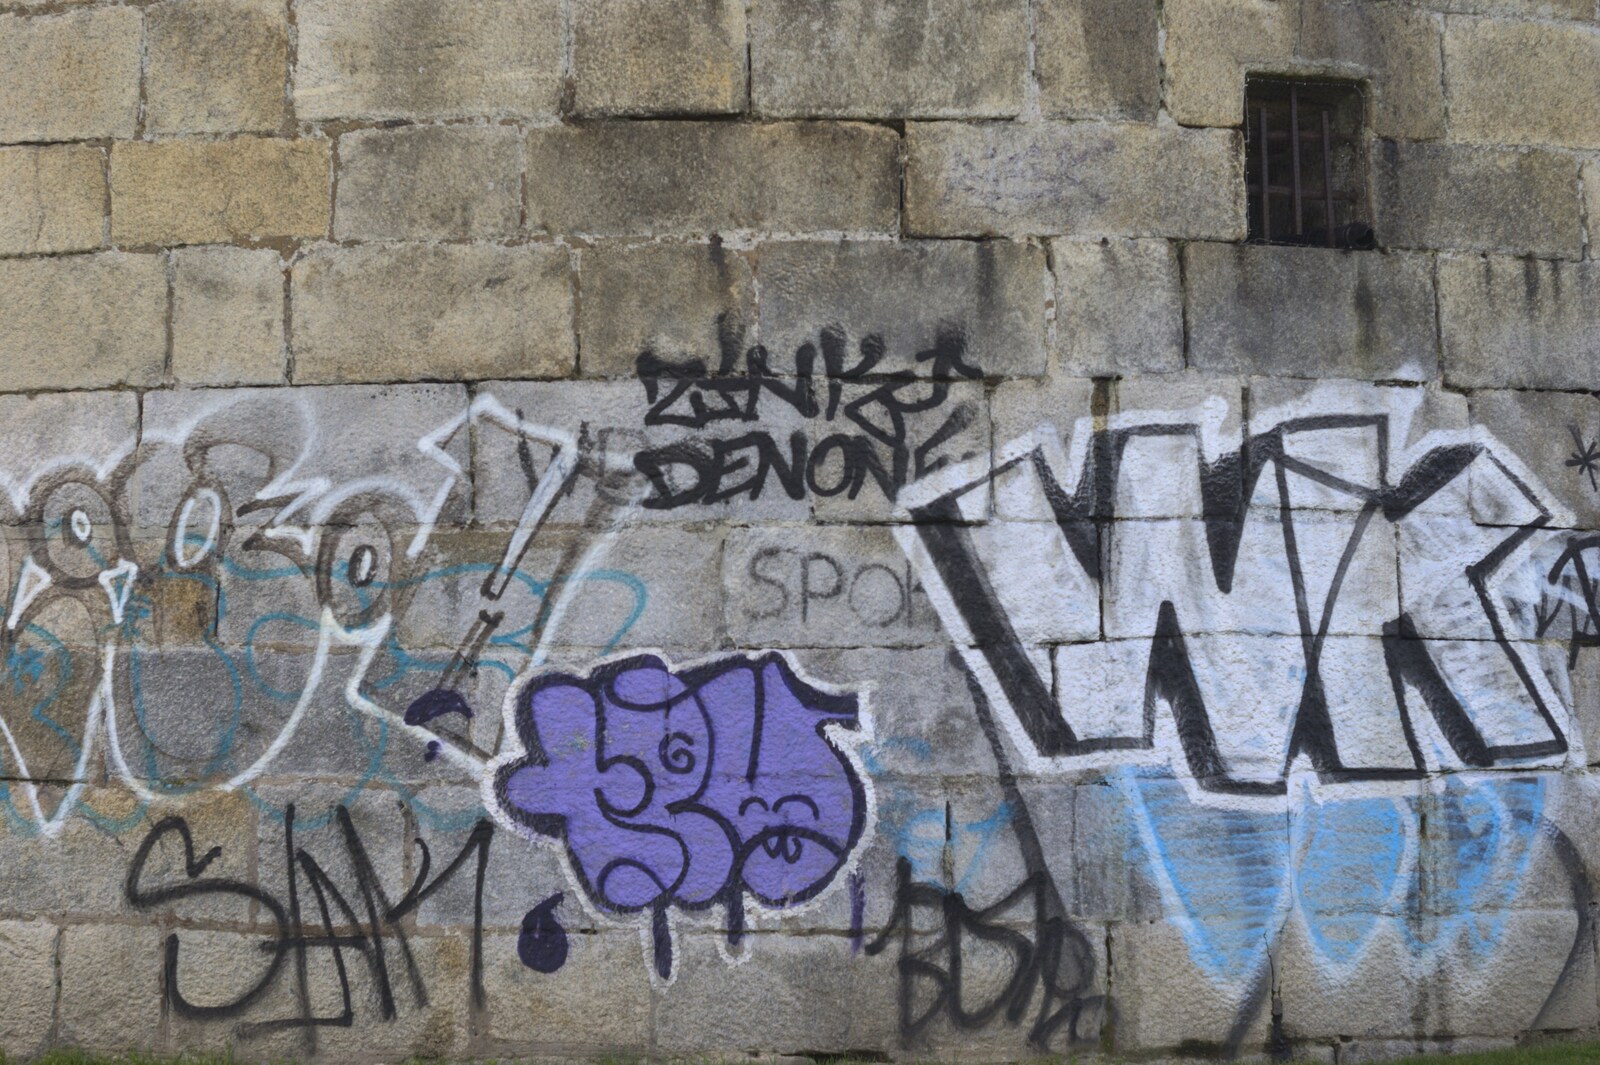 Graffiti on the Martello tower from Christmas at Number 19, Blackrock, County Dublin, Ireland - 25th December 2009